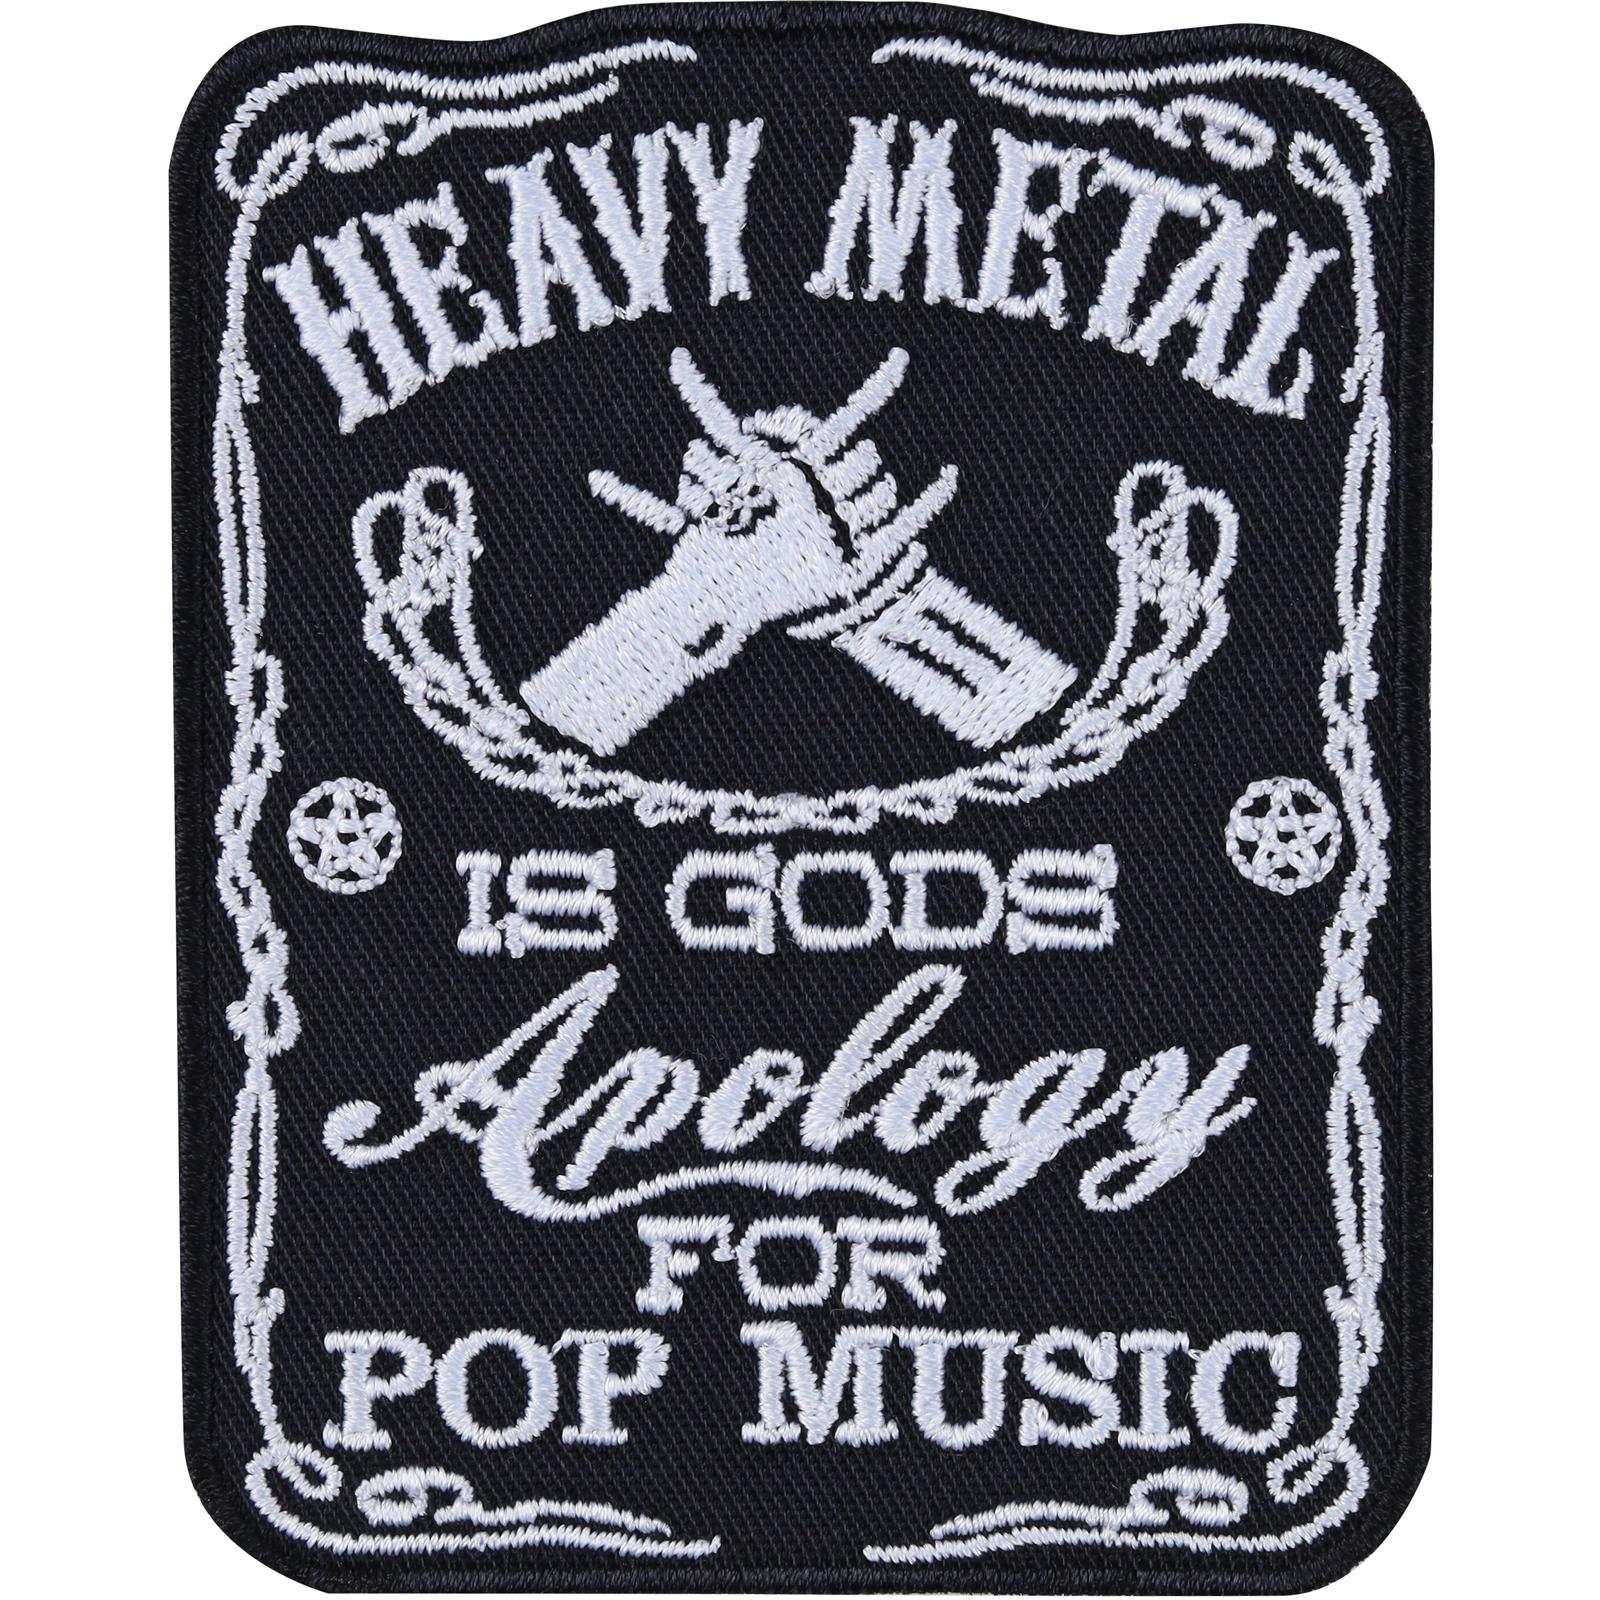 Heavy Metal is gods apology for Pop Music - Patch